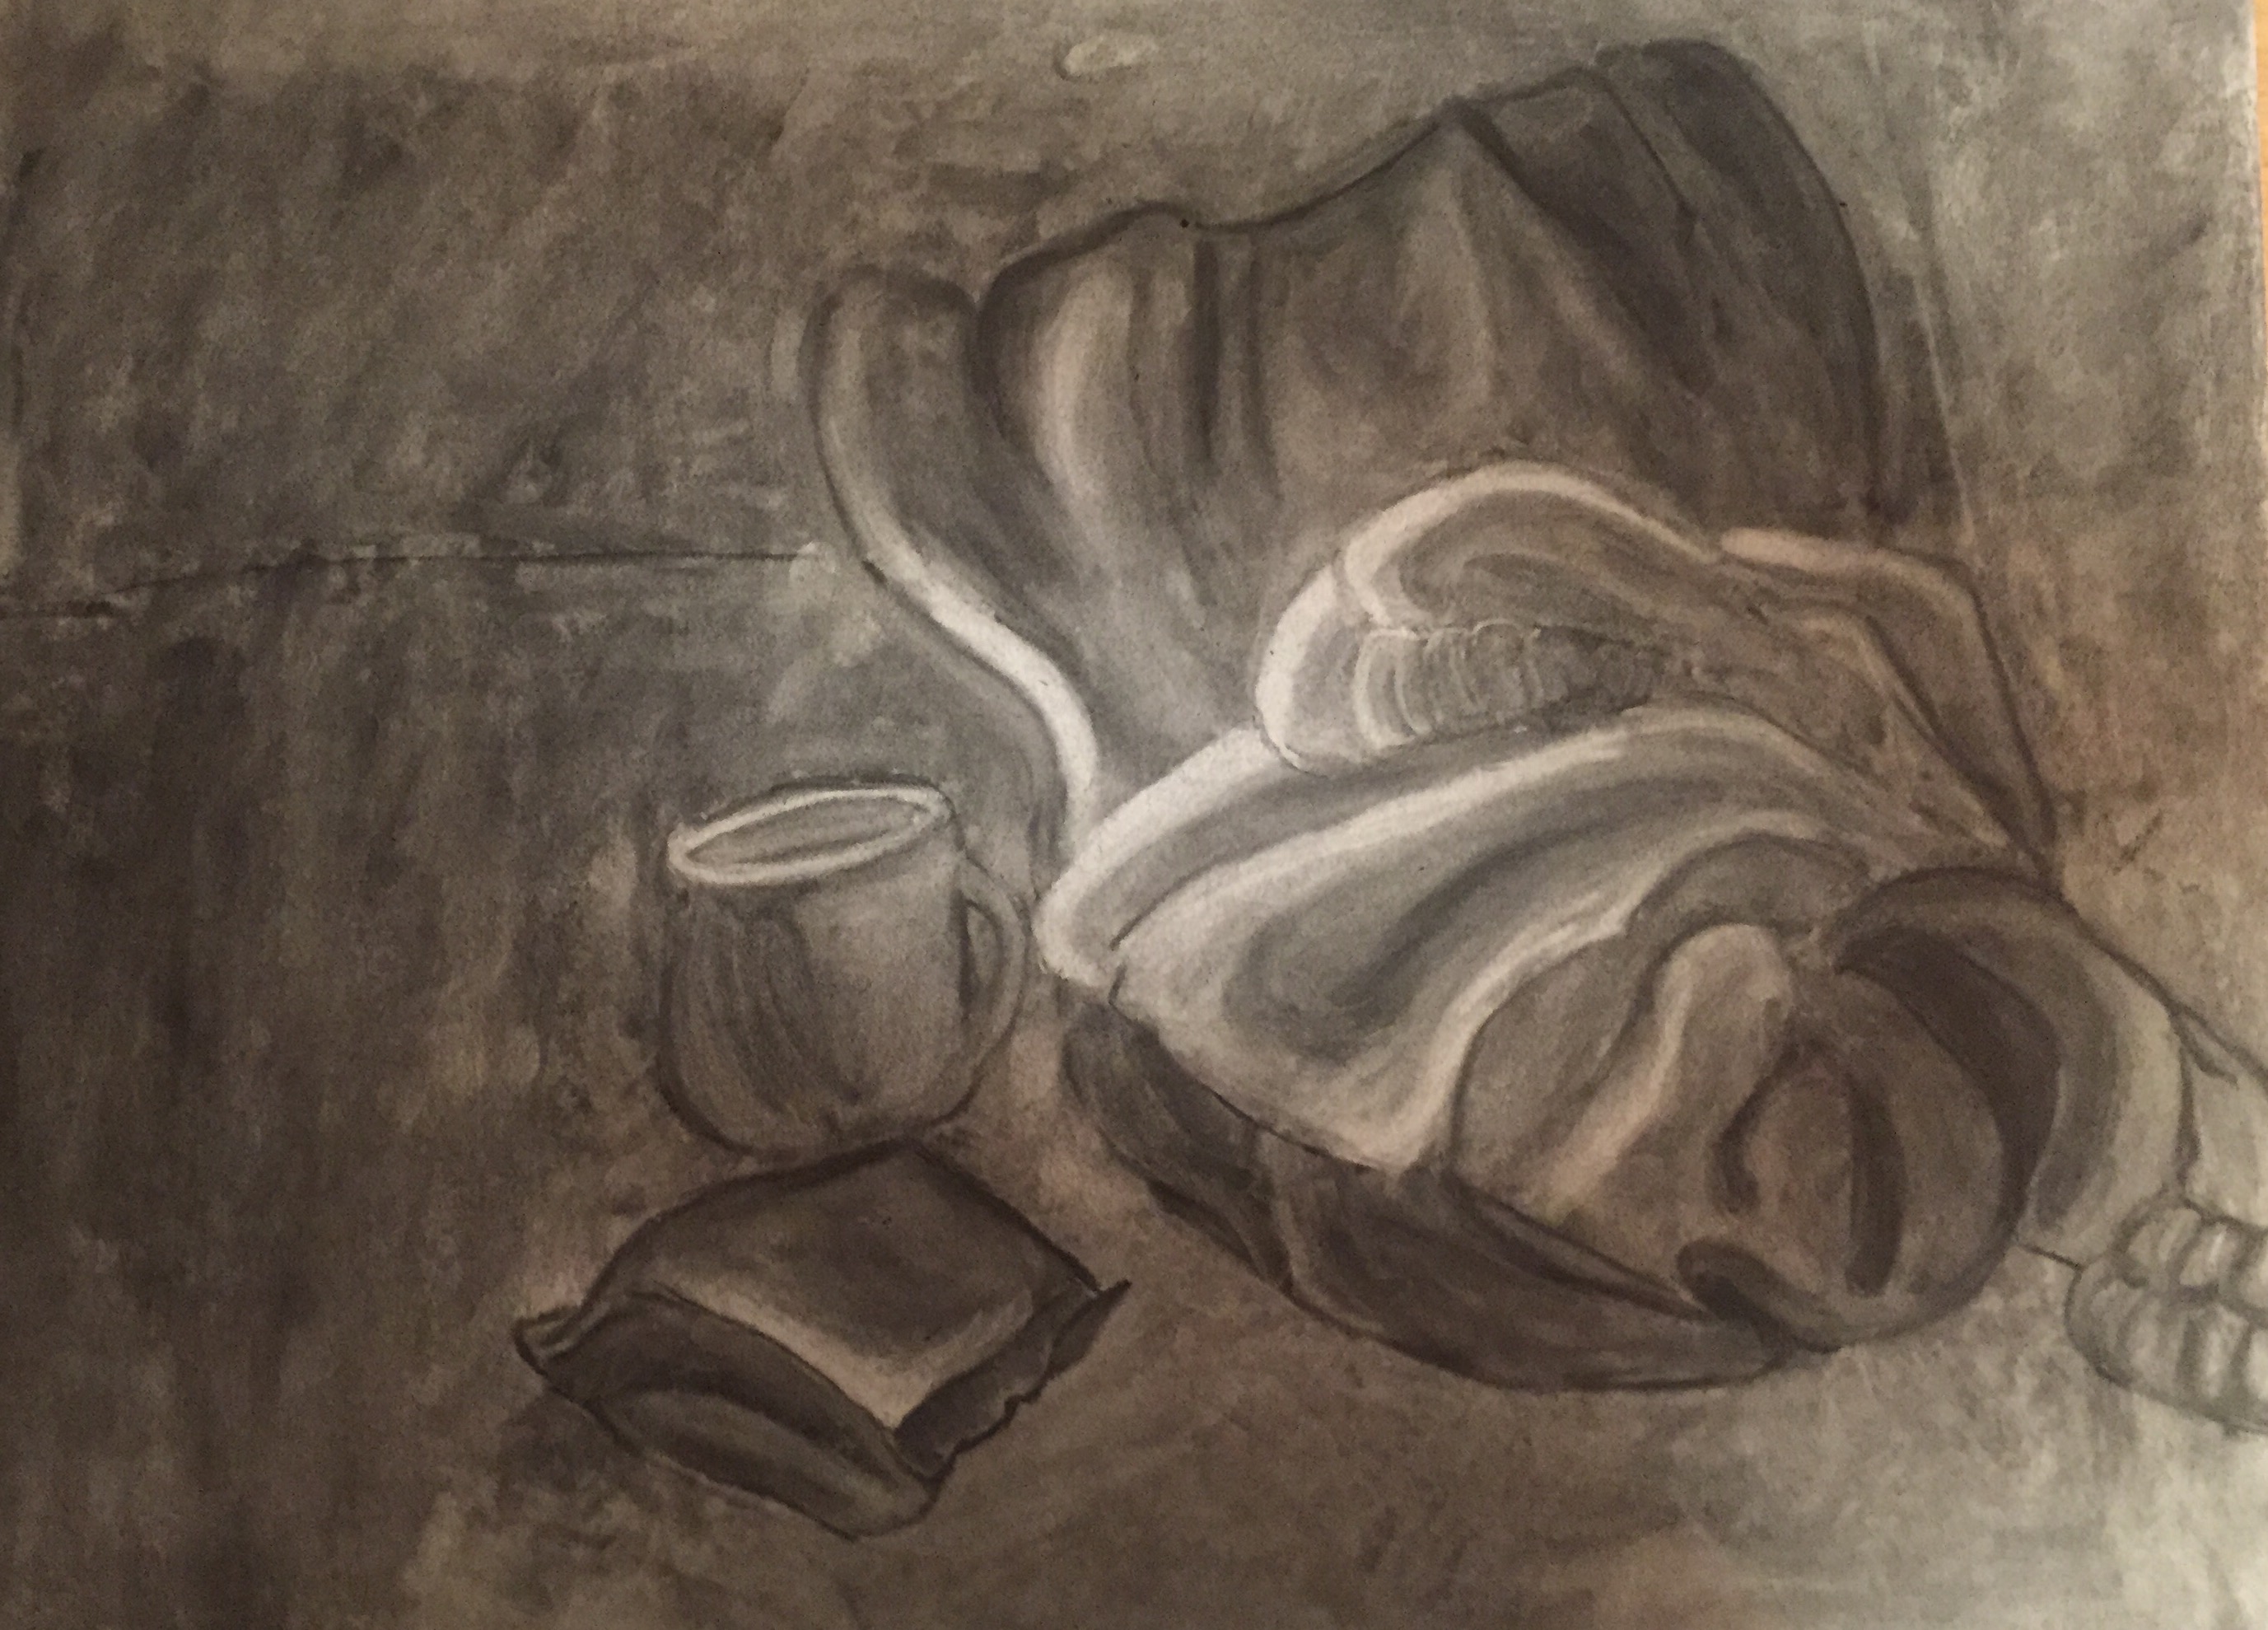 Charcoal Drawings- In Class and Homework